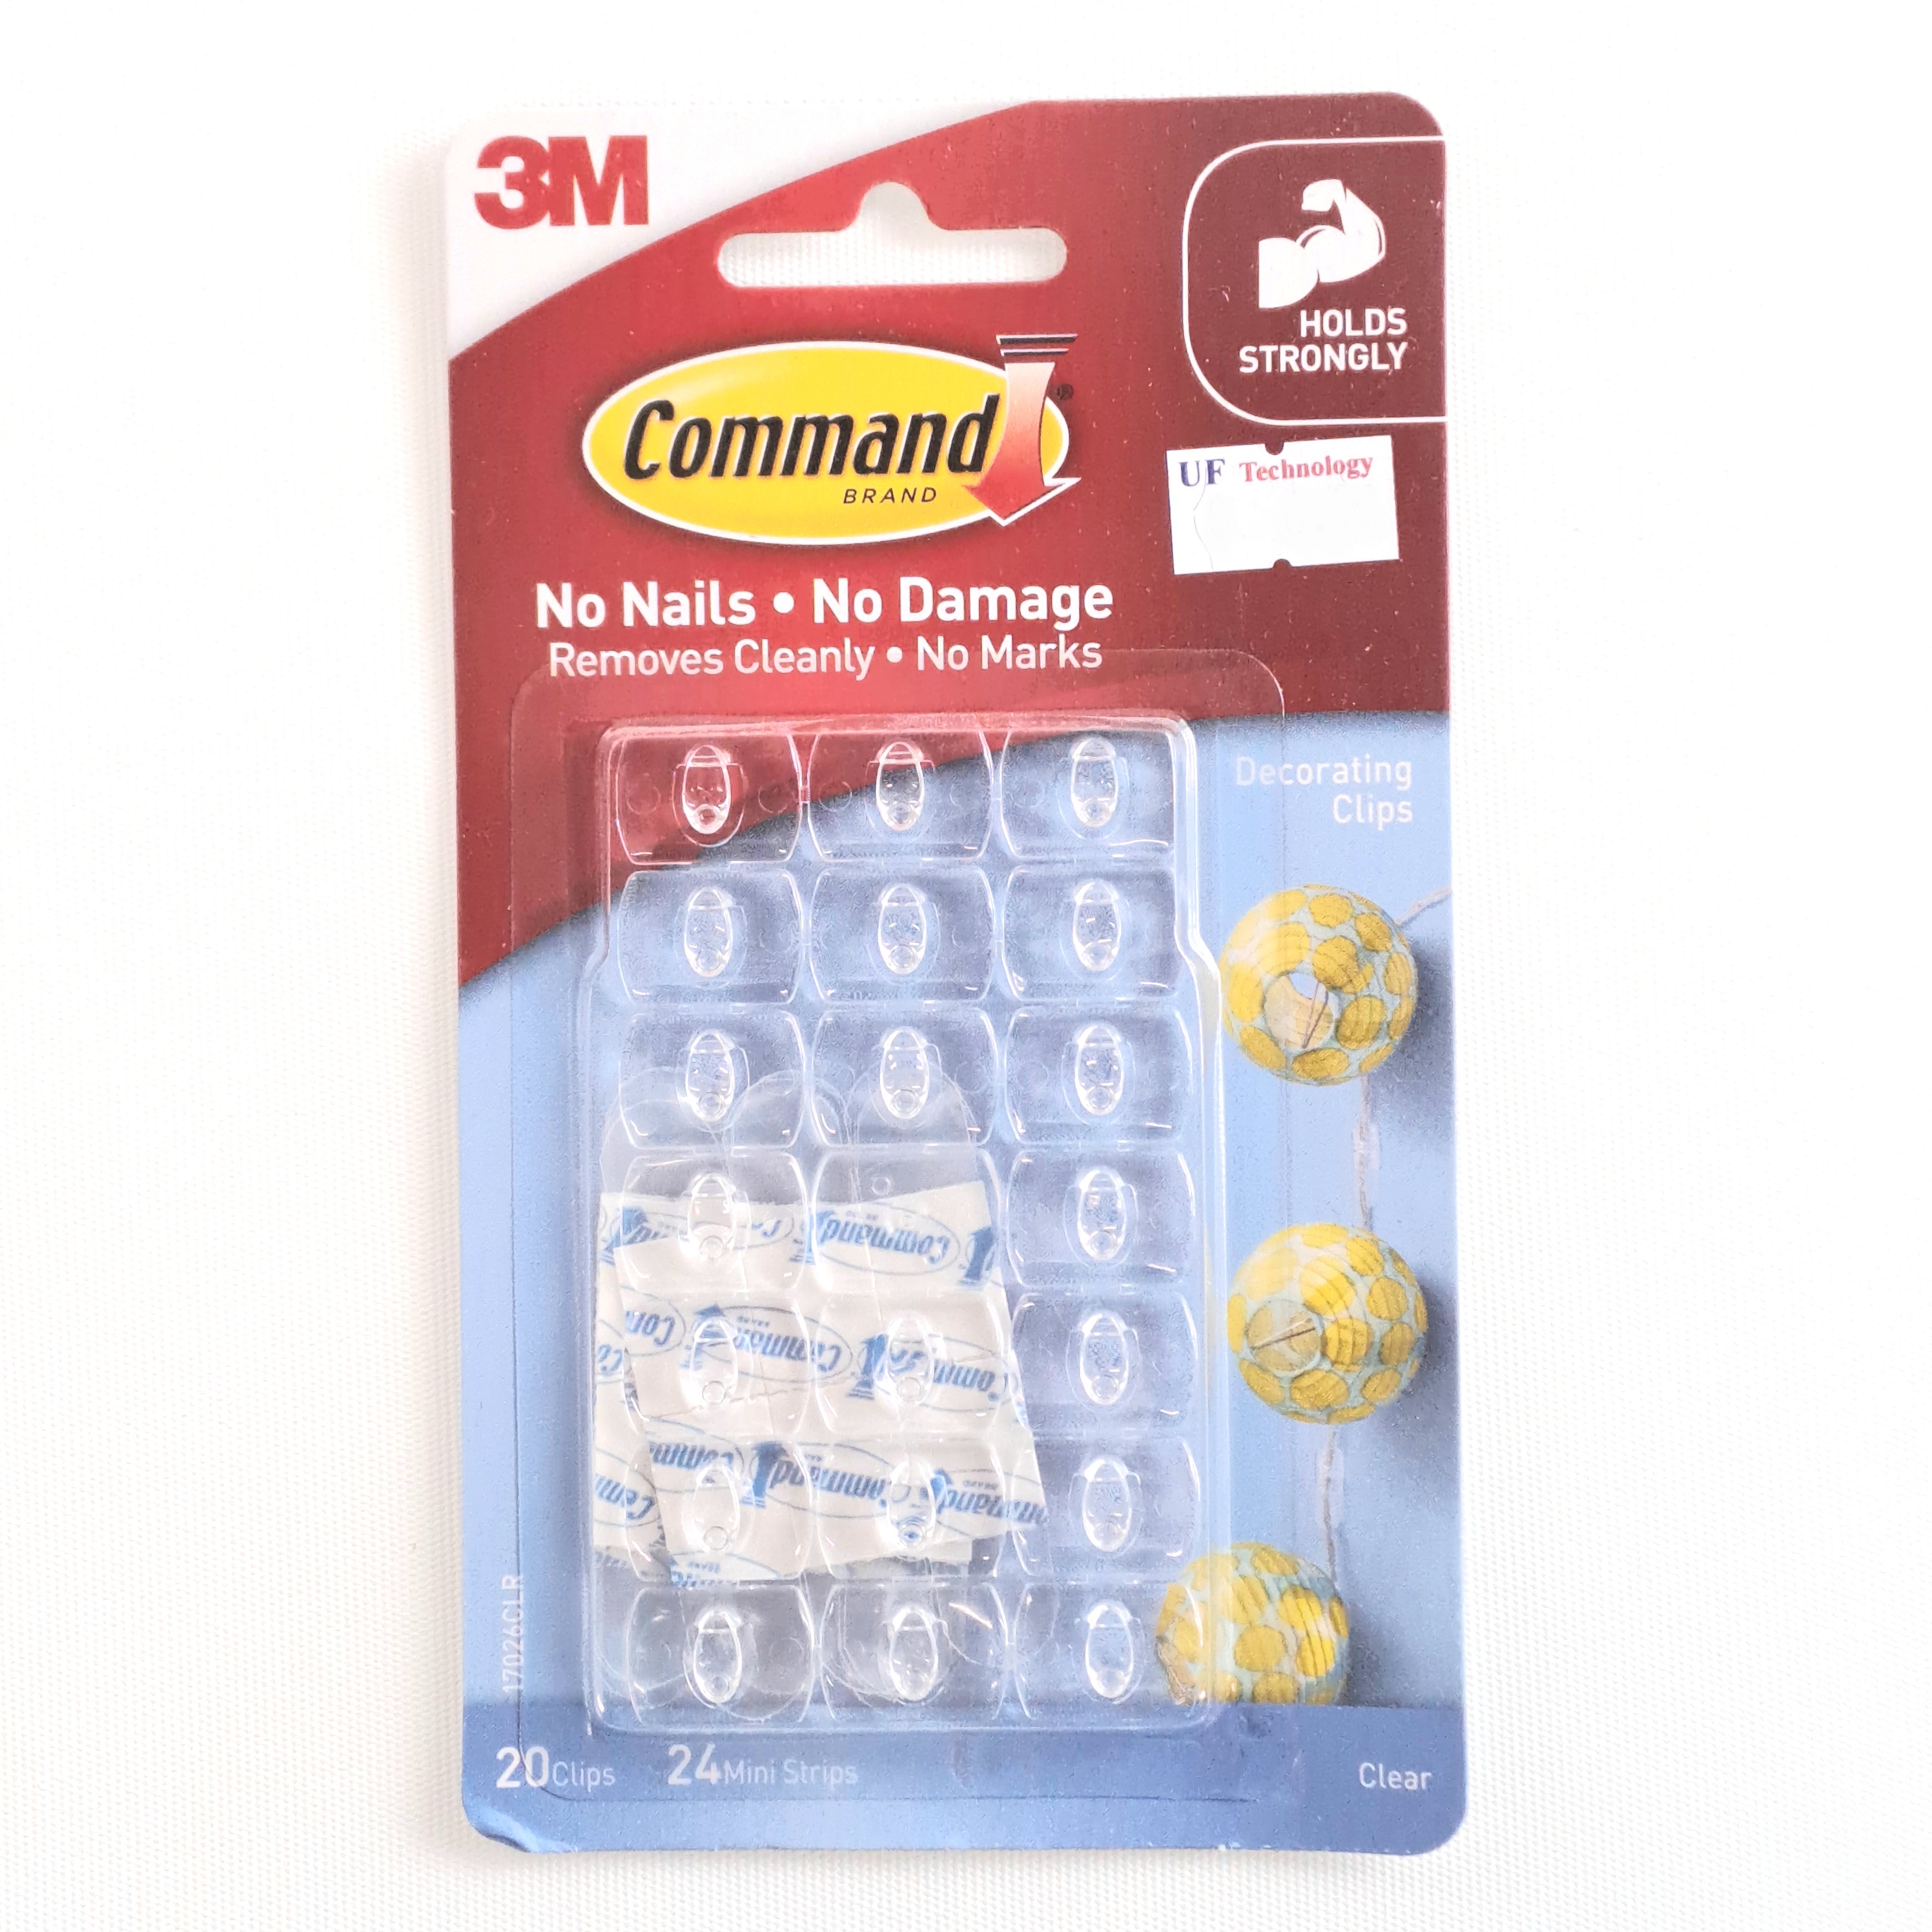 3M Command Clear Decorating Clips With Clear Strips